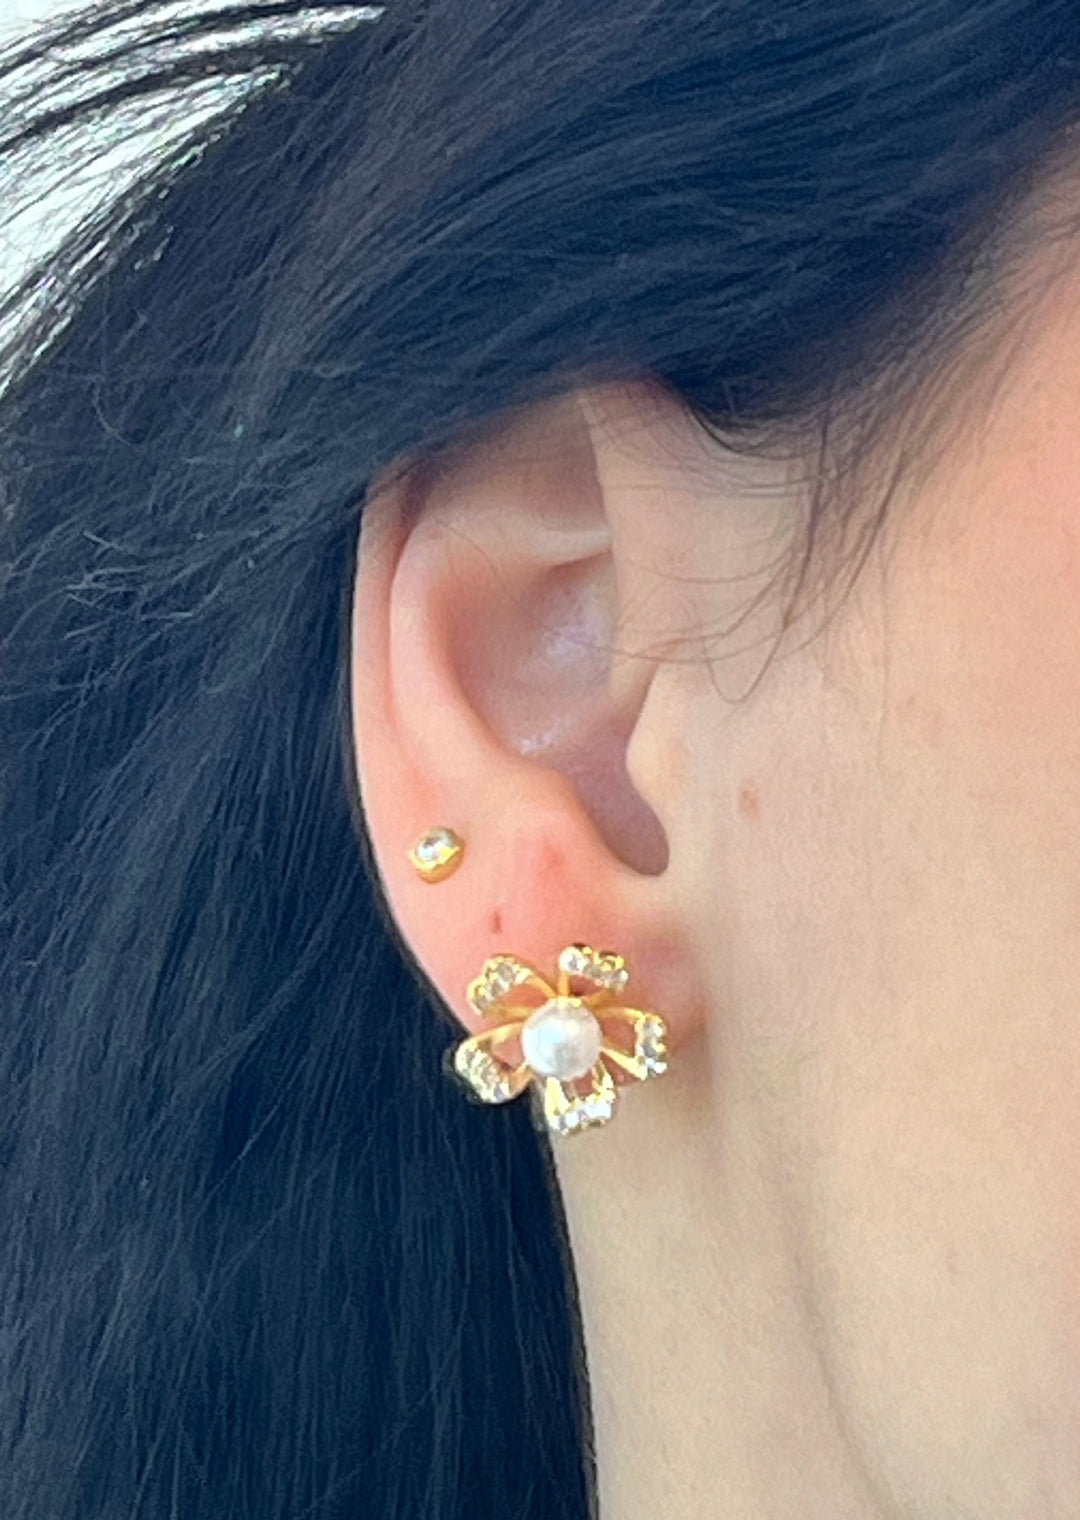 Flower Pearl Earring, Jewelry, Adeline, Adeline, dallas boutique, dallas texas, texas boutique, women's boutique dallas, adeline boutique, dallas boutique, trendy boutique, affordable boutique